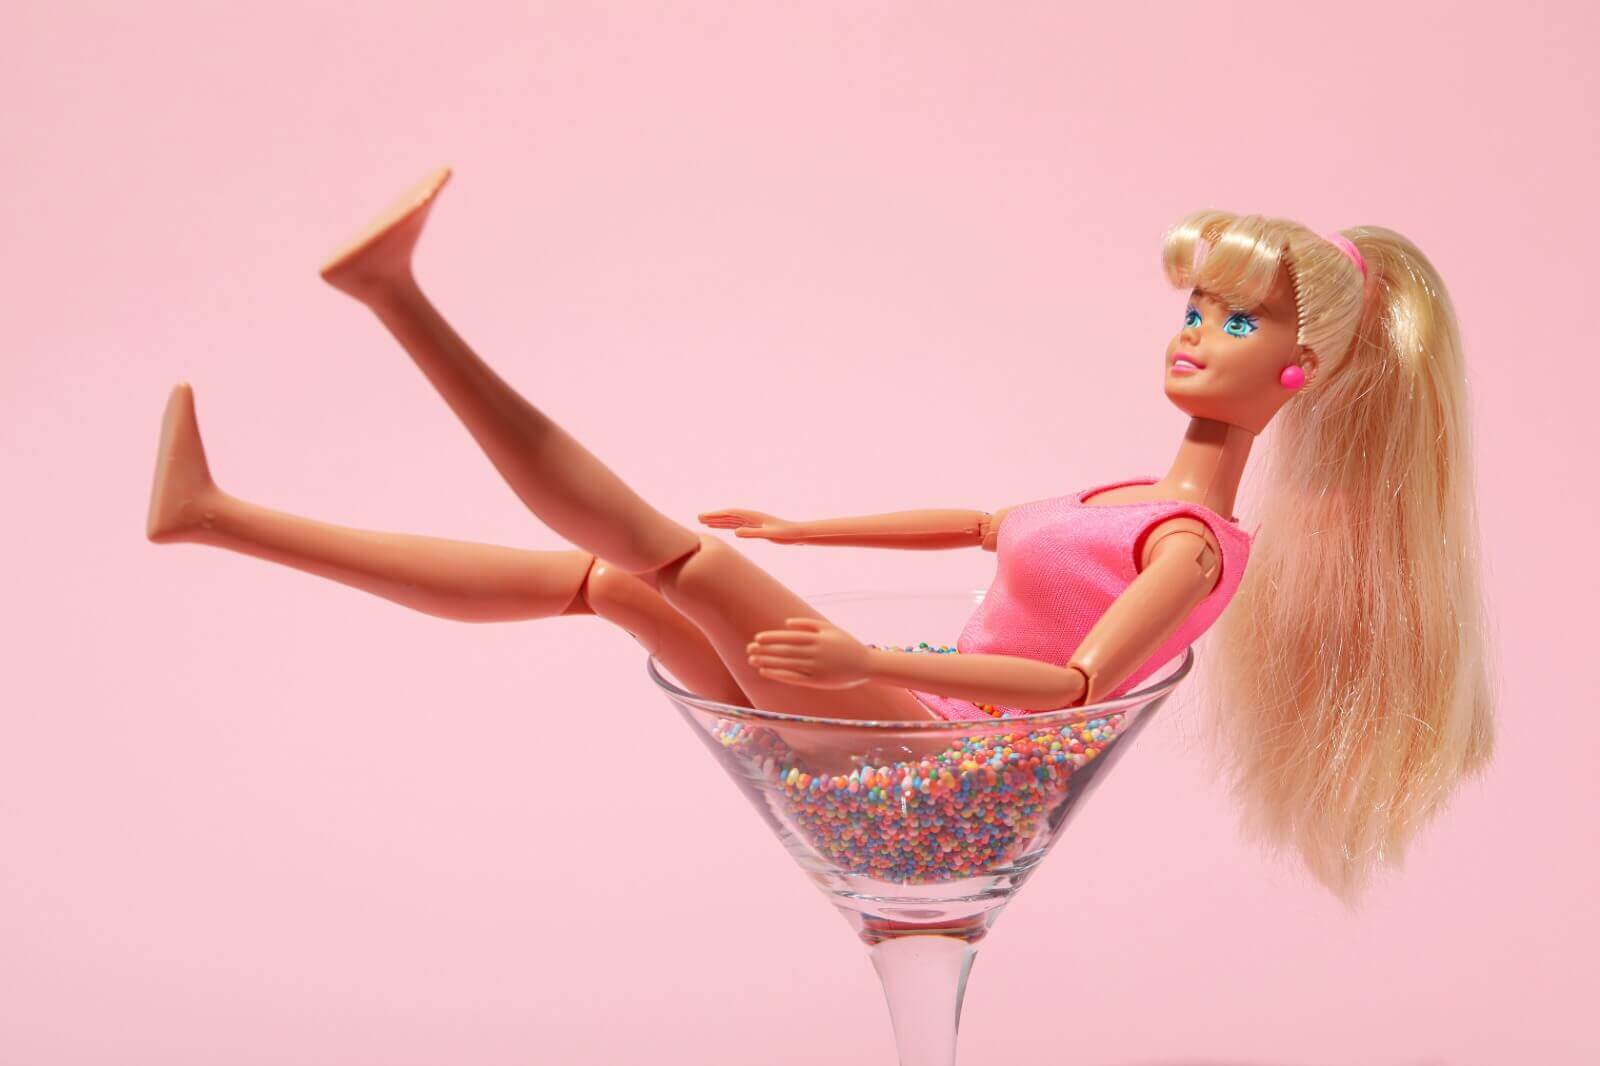 are-you-a-barbie-girl-in-a-barbie-world (1)